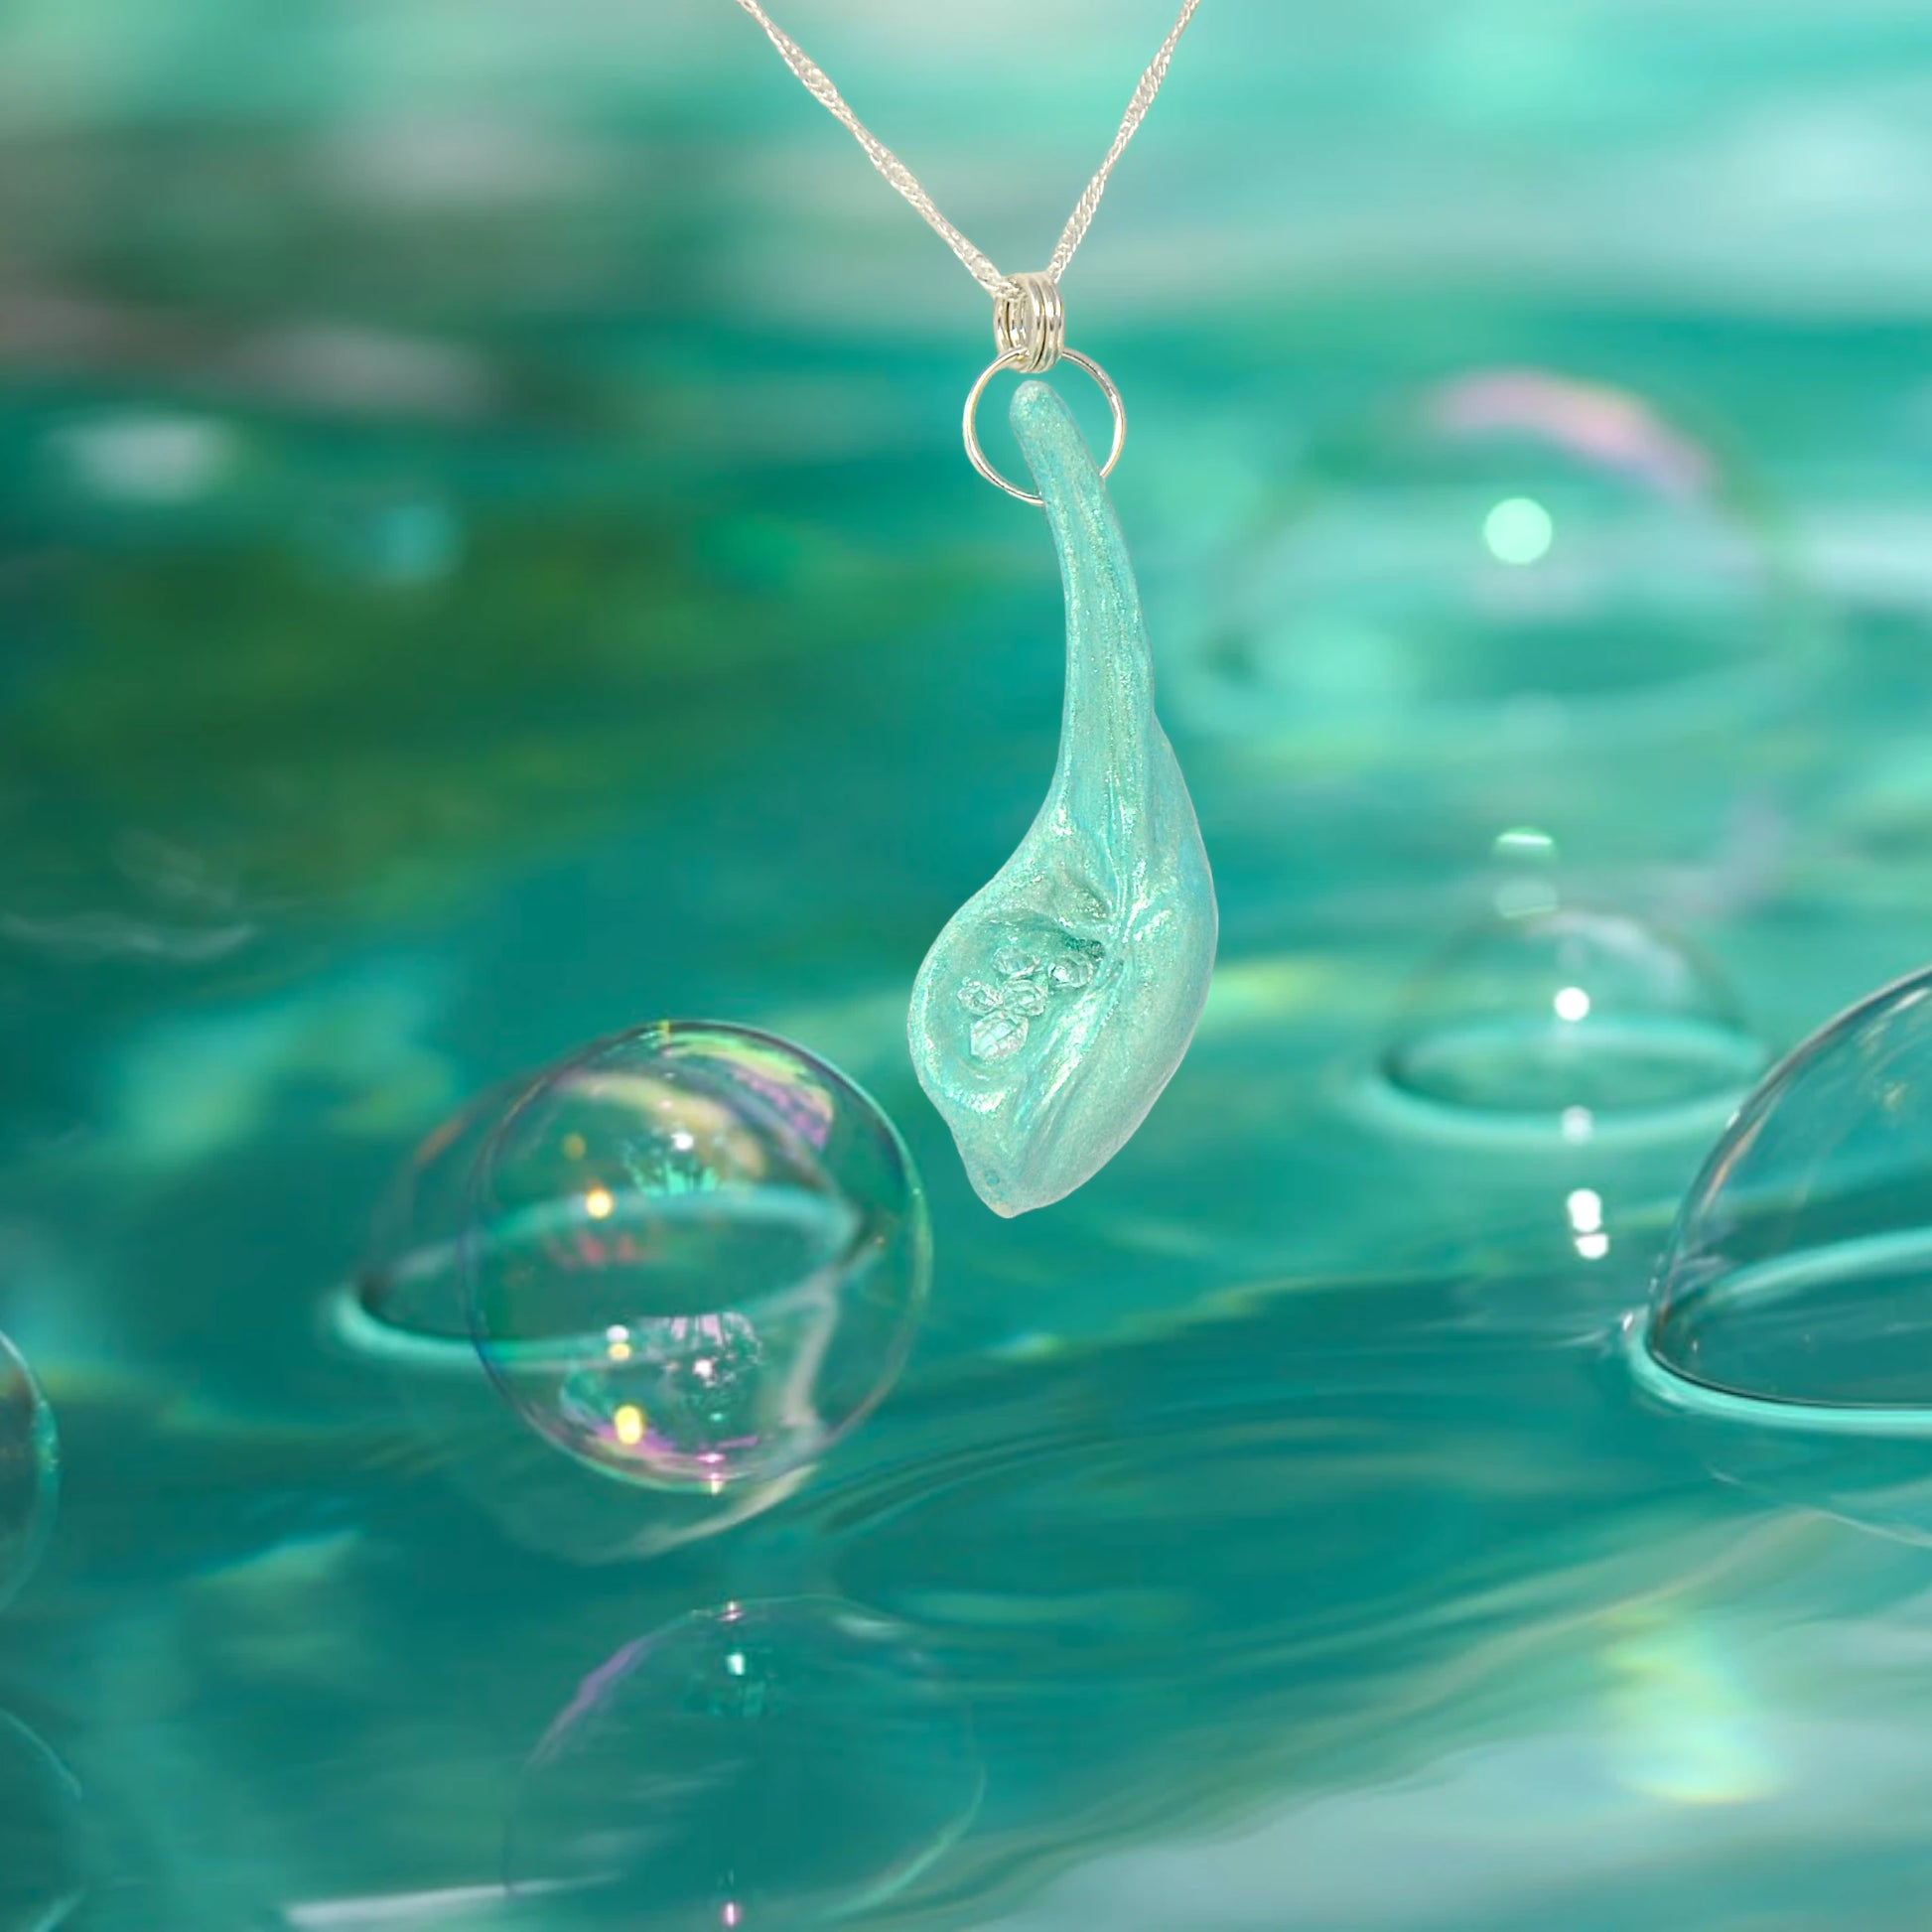 The Cascadia Pendant created with a natural seashell from the beaches of Vancouver Island.  The seashell is turquoise and has high quality herkimer diamonds. The pendant is hanging over a sea of green with bubbles near and on top of the water.